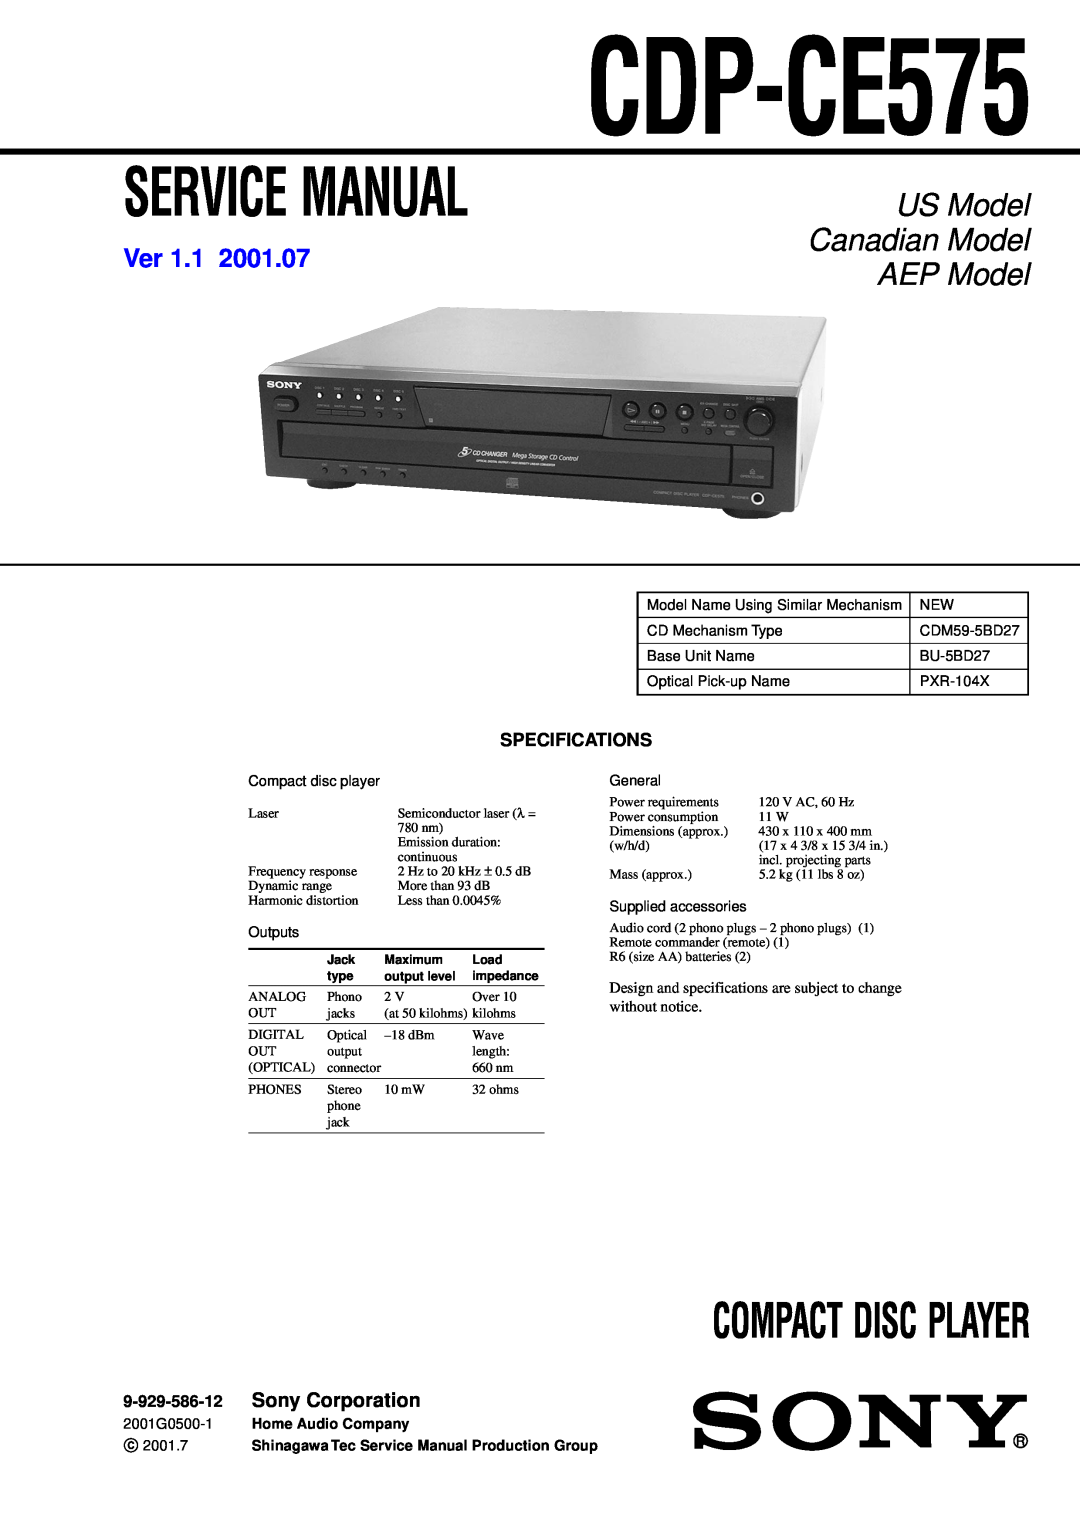 Sony CDP-CE575 service manual Compact Disc Player, US Model, Canadian Model, AEP Model, Ver, Sony Corporation 